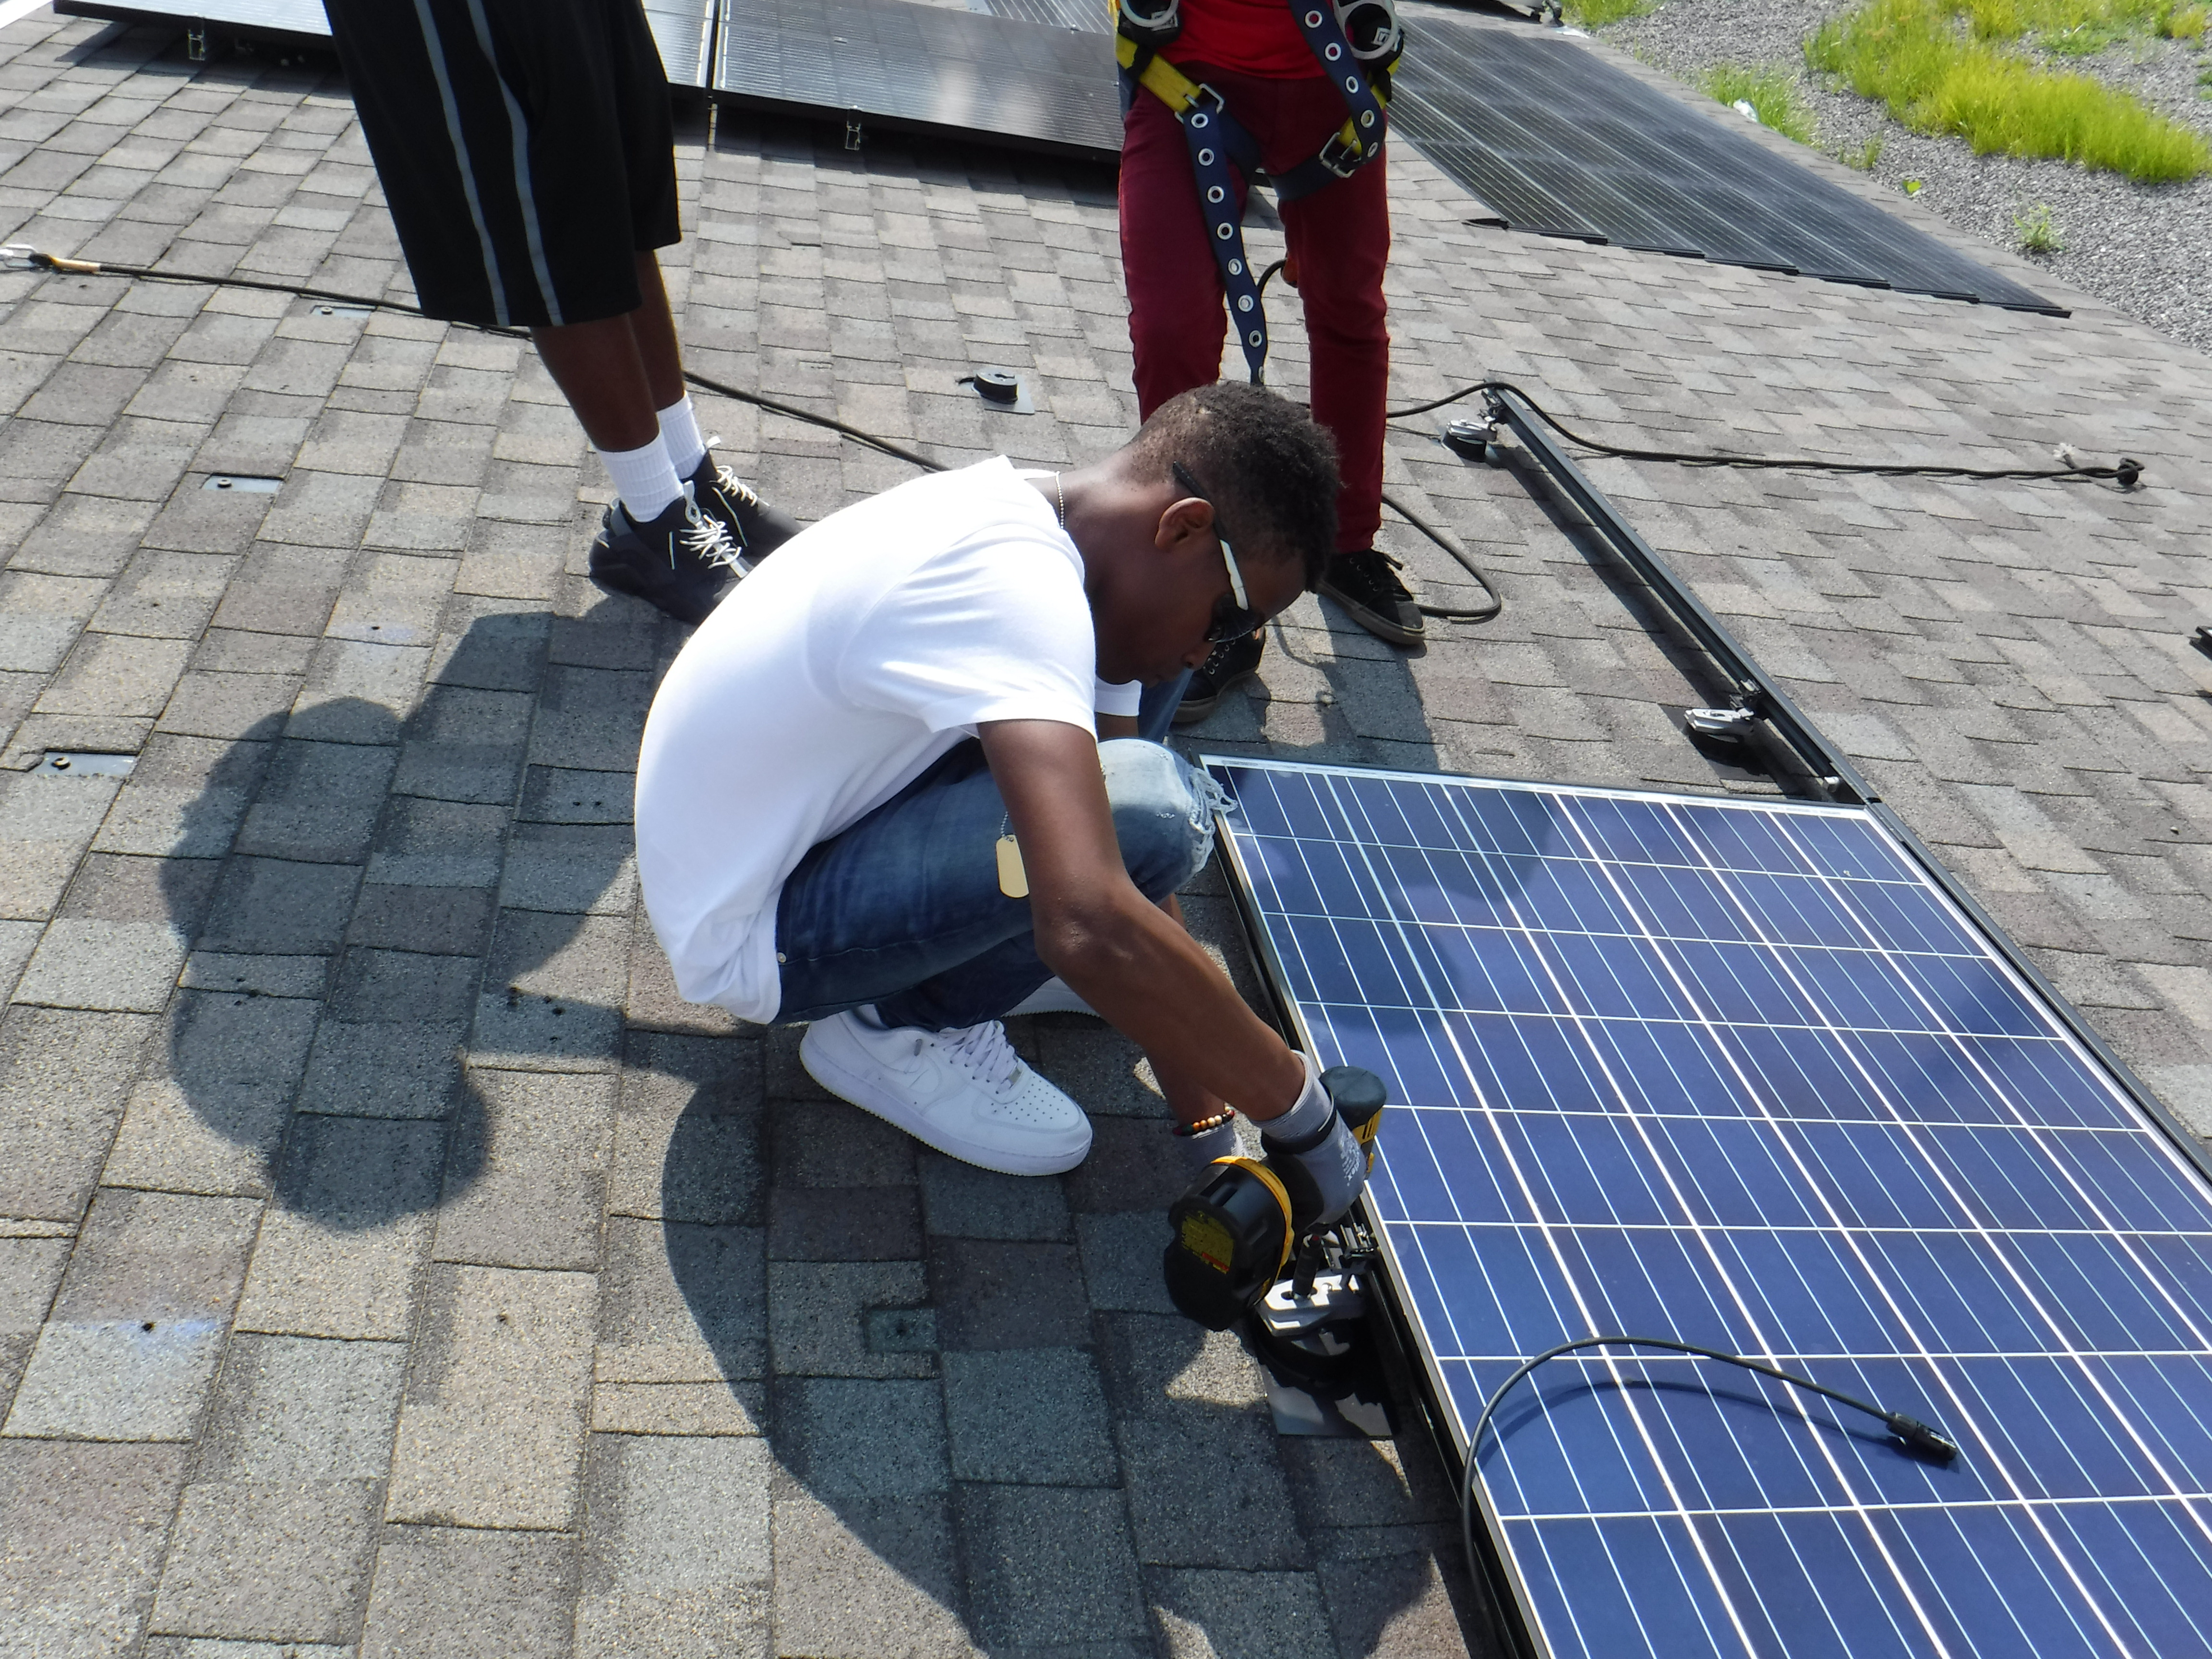 Student trainees receive hands-on experience in solar installation under the supervision of practitioners provided by Philadelphia-based company Solar States.